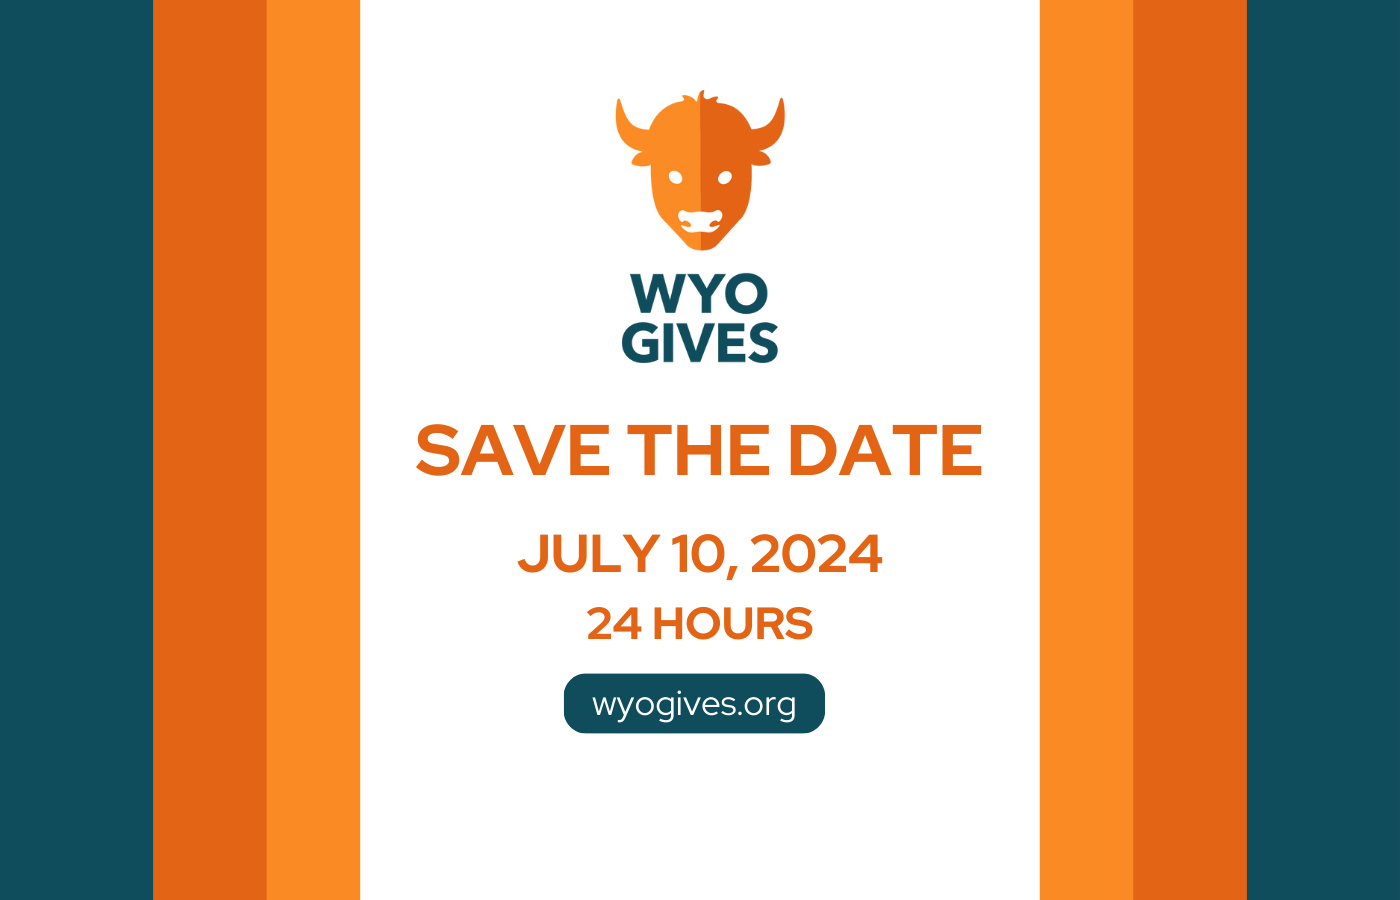 wyogives save the date july 10, 2024 24 hours givign day wyogives.org